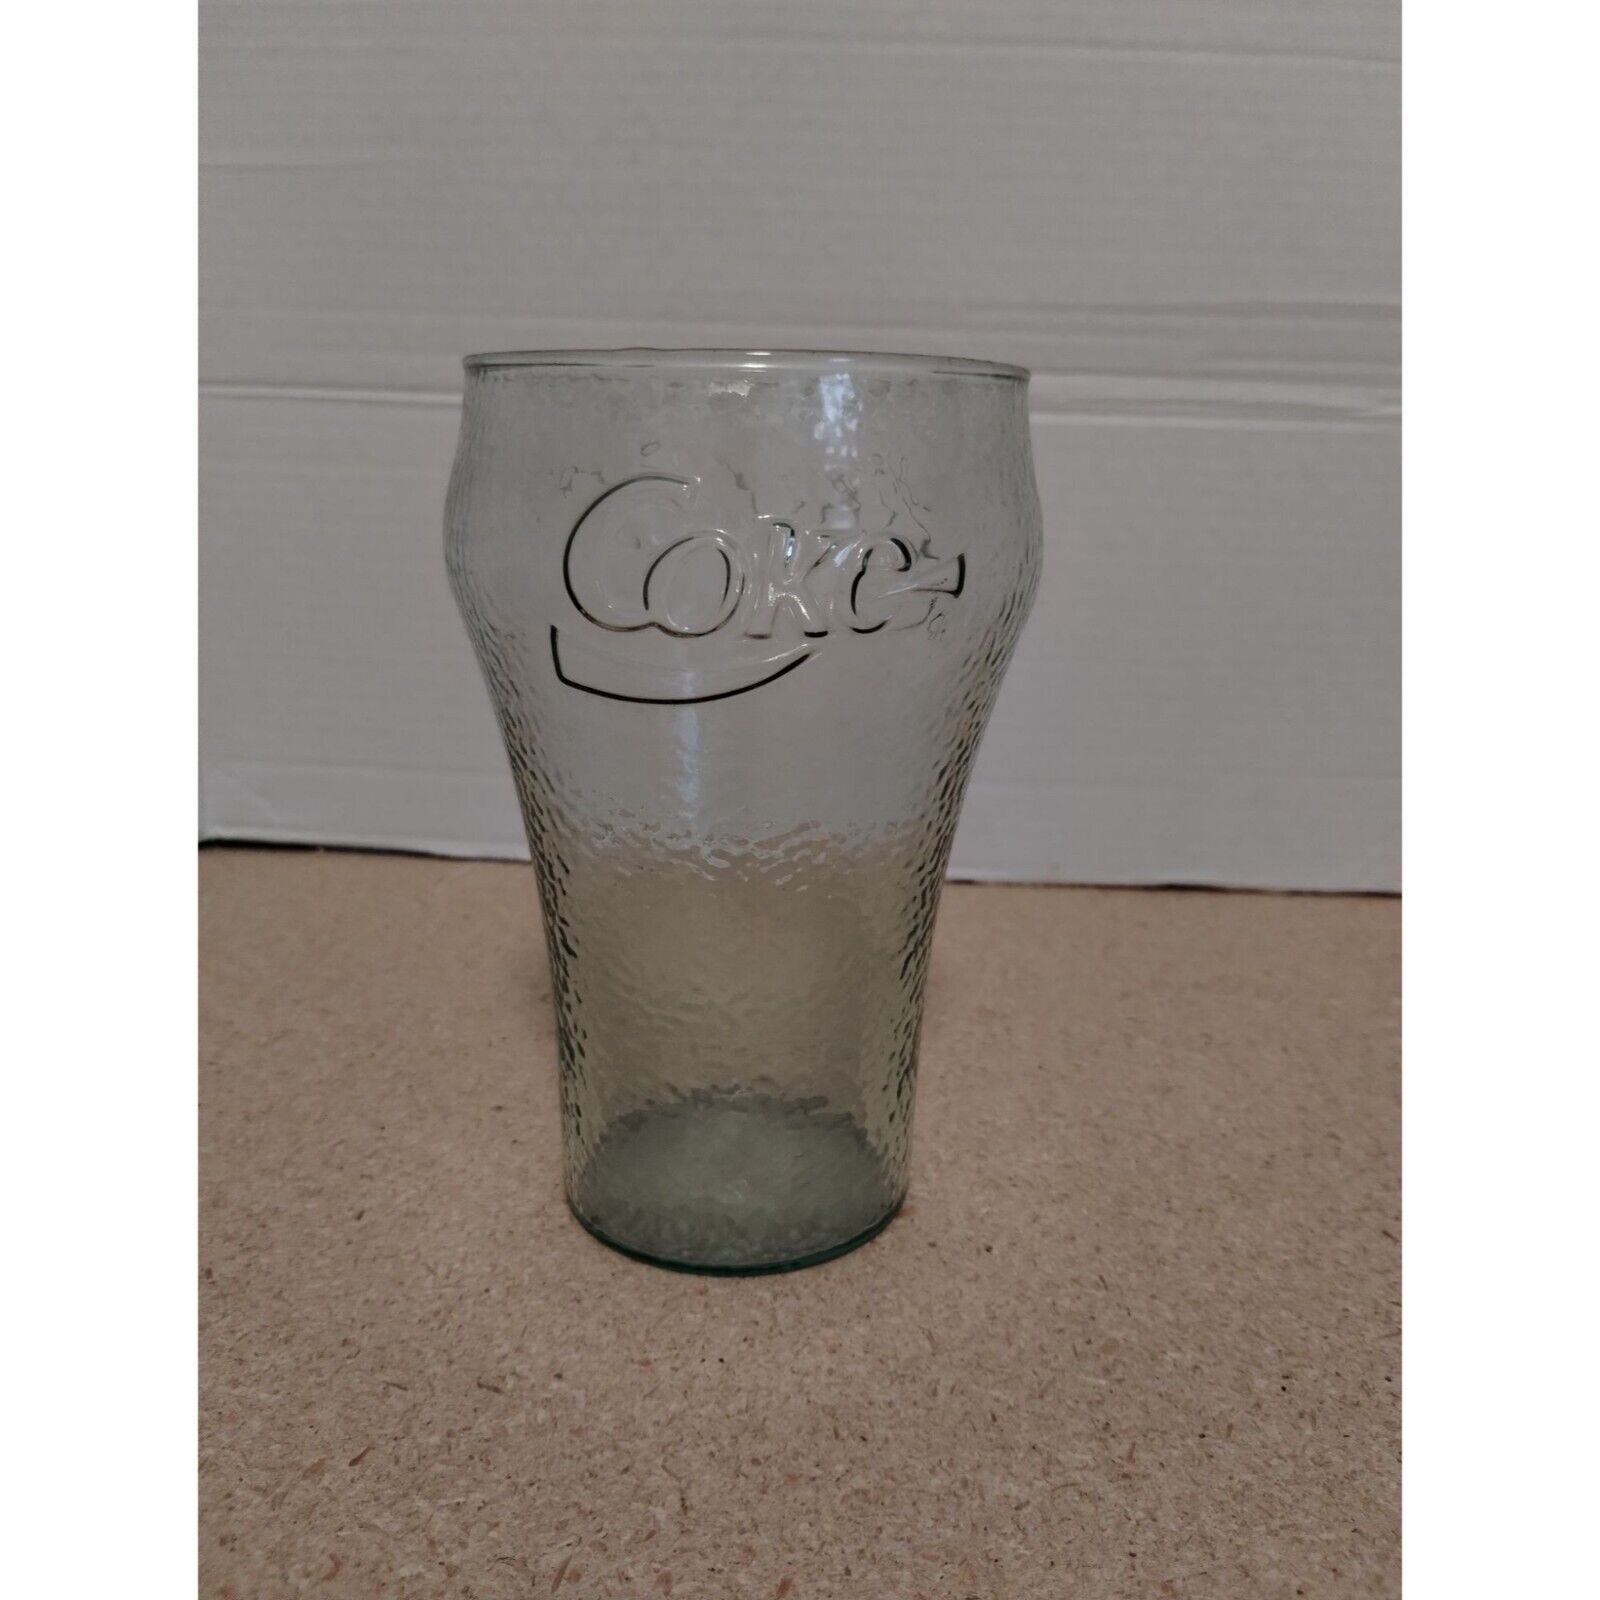 Coca-Cola Extra Large 28 oz Drinking Glass - Indiana Glass Green Pebble